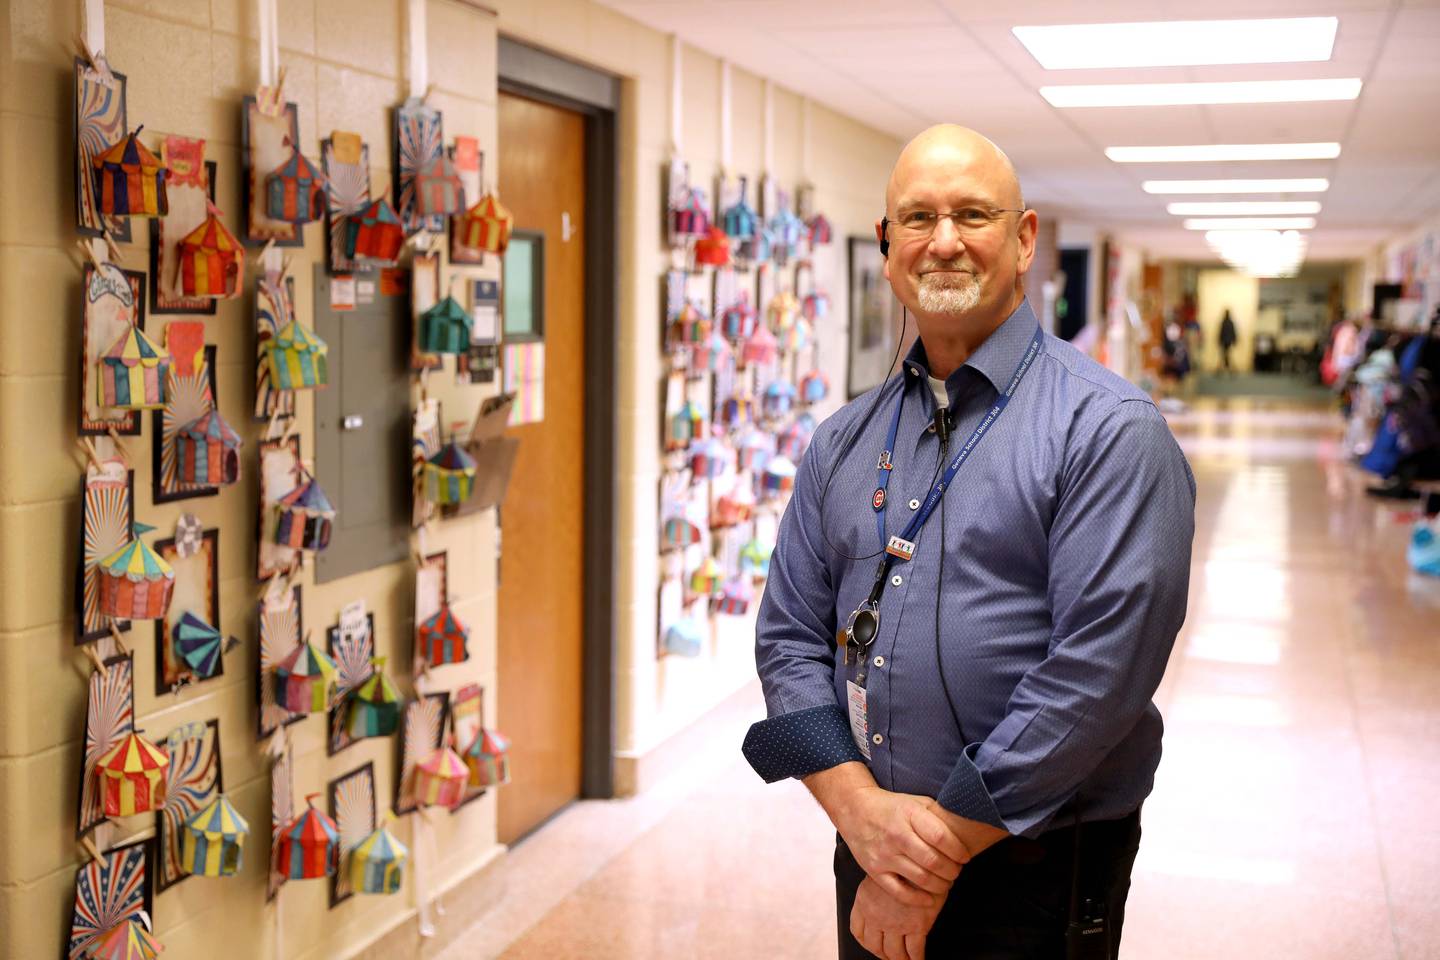 Principal Ron Zeman will be retiring June 30 from Western Avenue Elementary School in Geneva. He has been in education for 33 years, 23 of them as an administrator, 8 as teacher, 5 as special ed coop consultant.